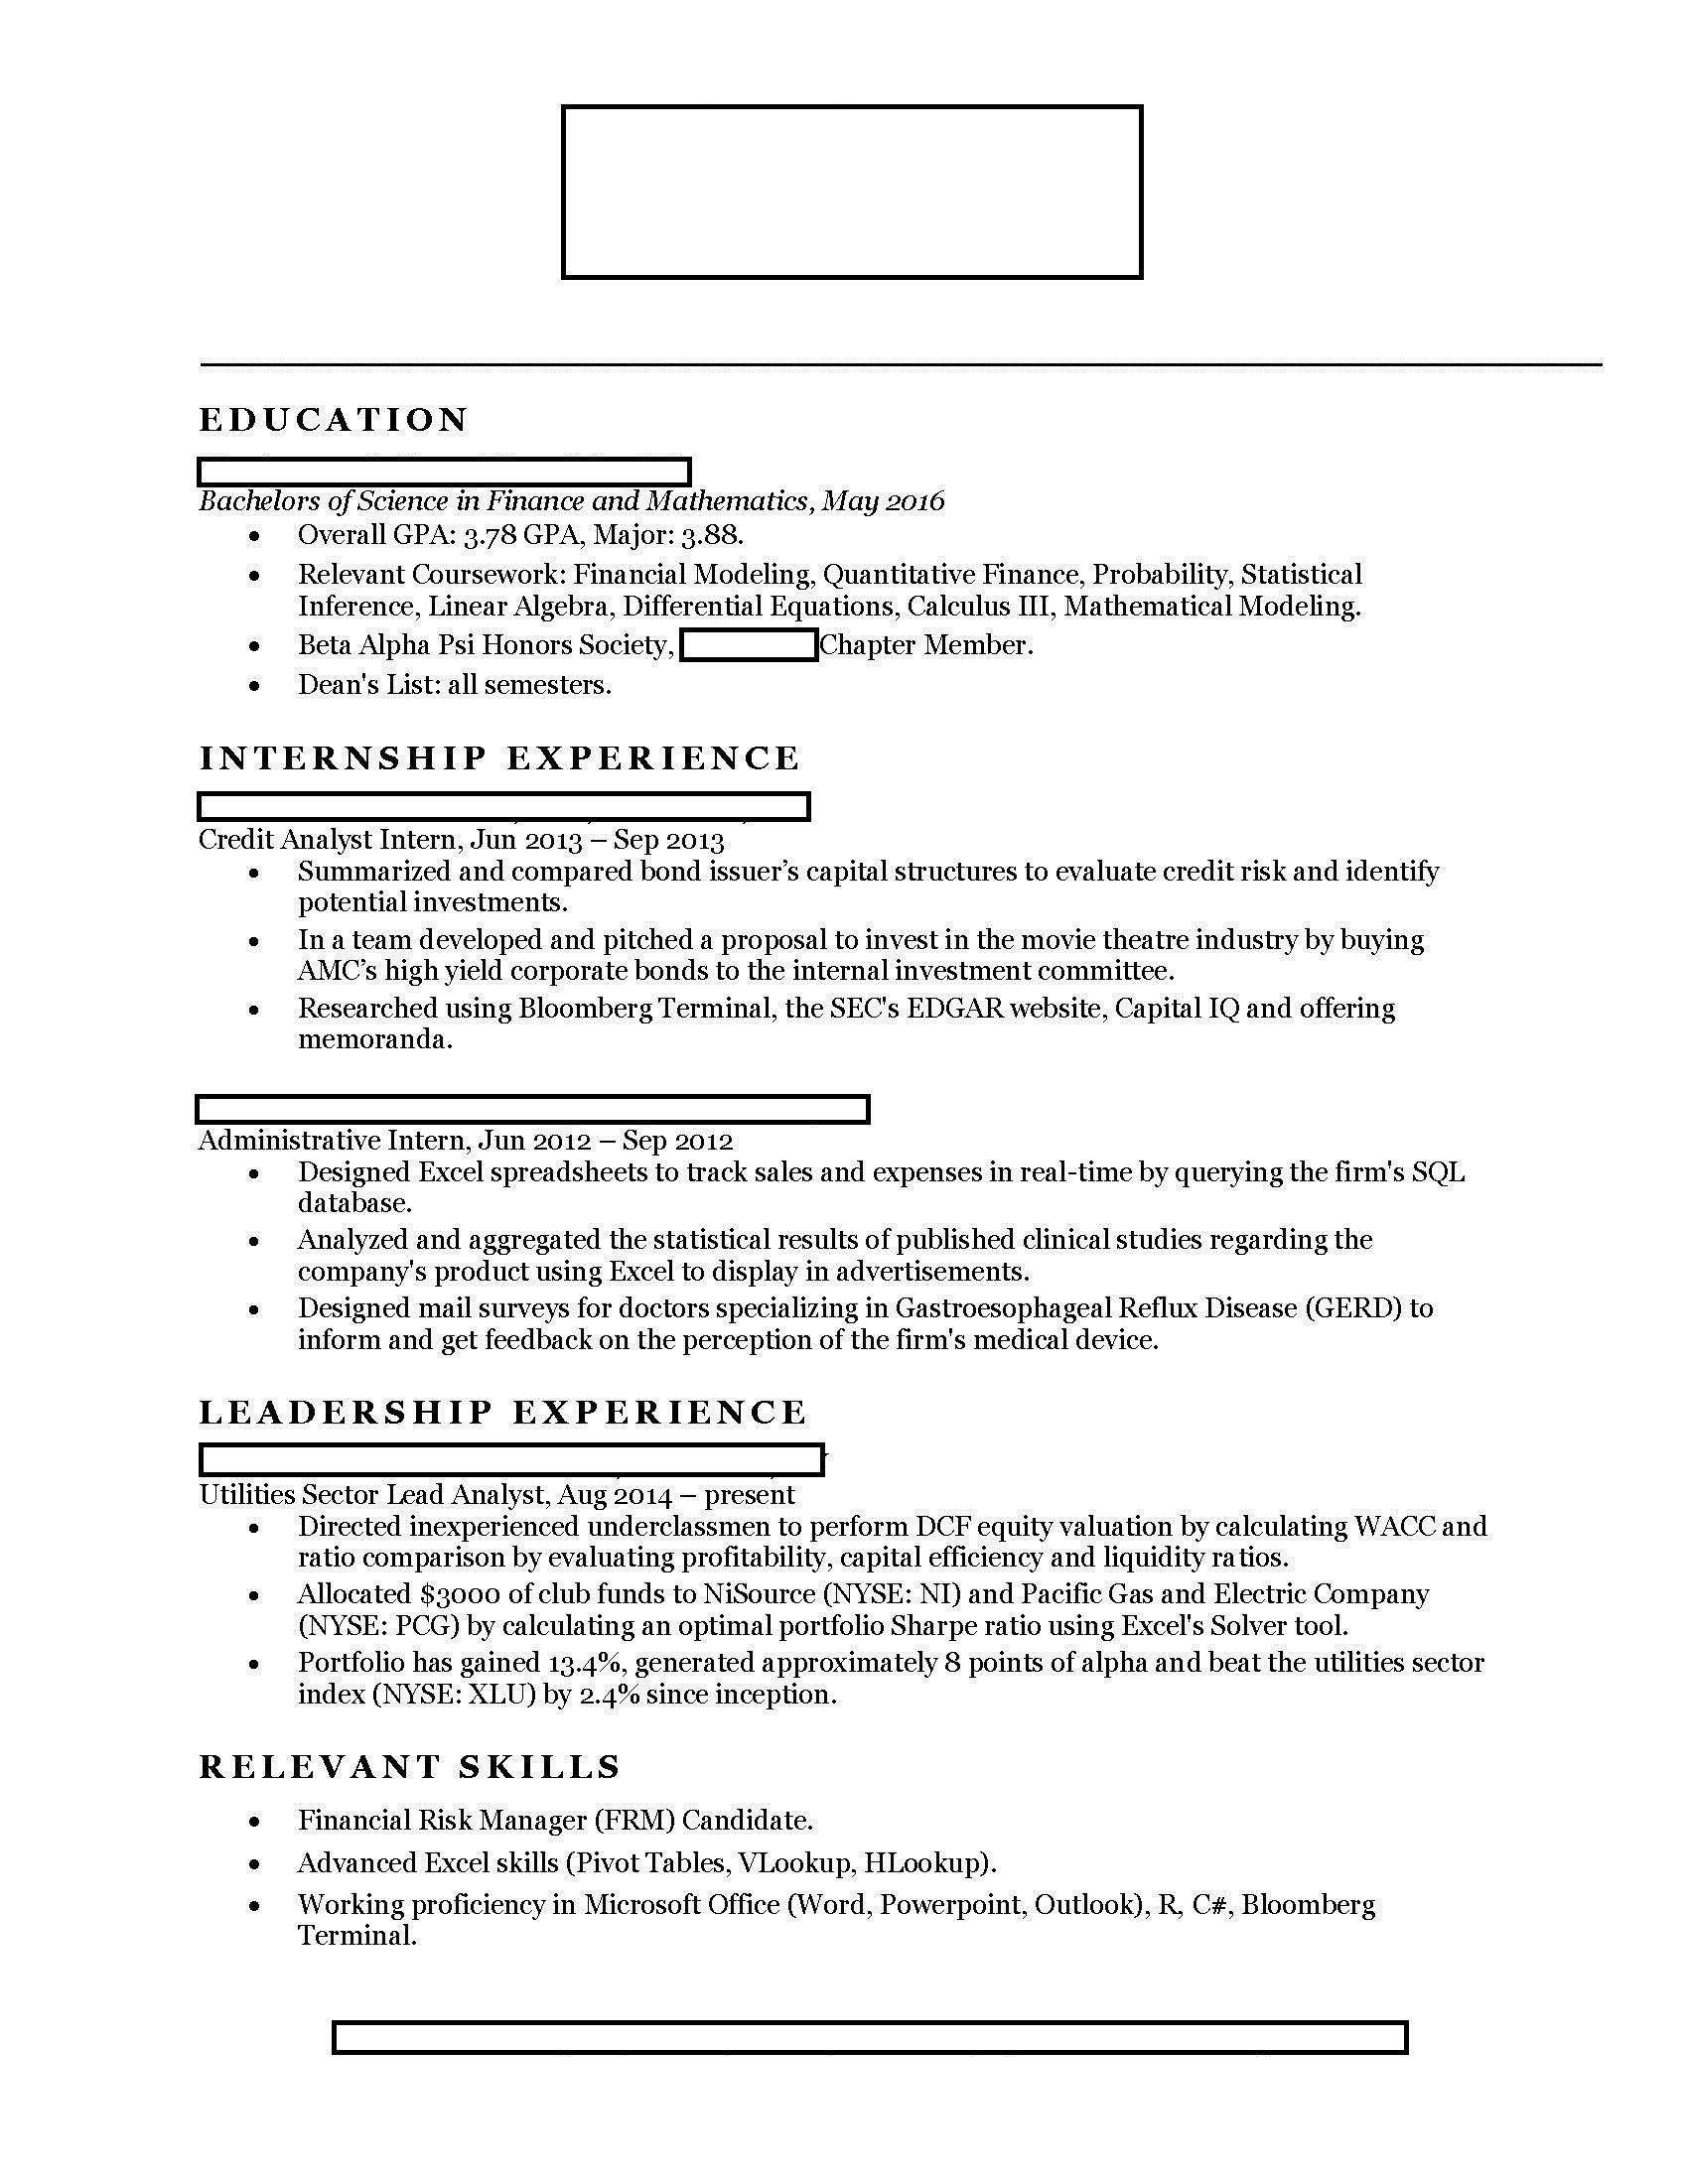 Sample Resume Finance Internship College Student Finance] Looking for Internships In Investment Banking/corporate …